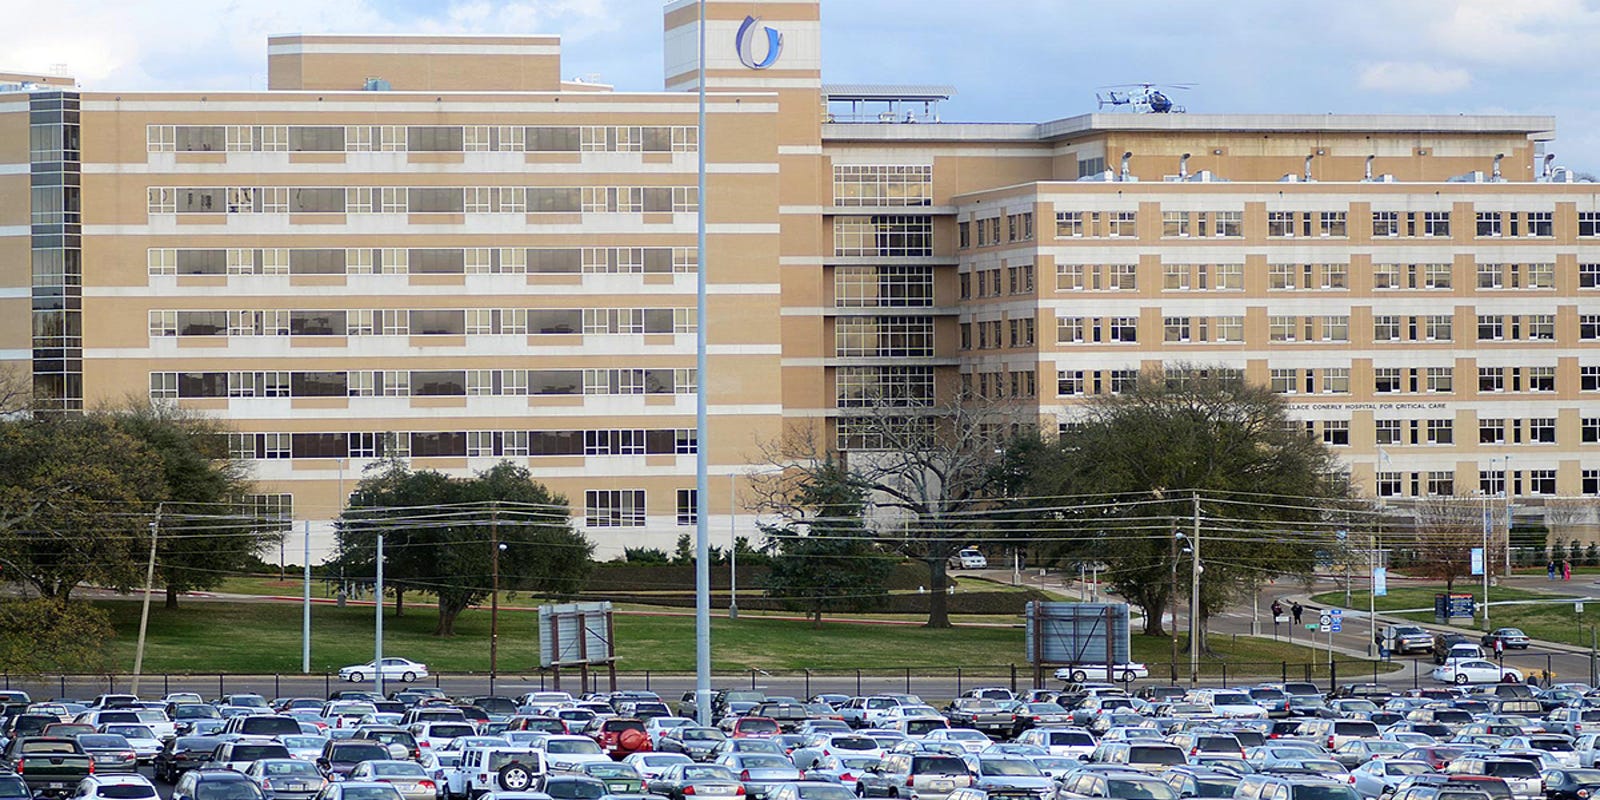 Ummc Gets F From Watchdog Group Other Hospitals Graded